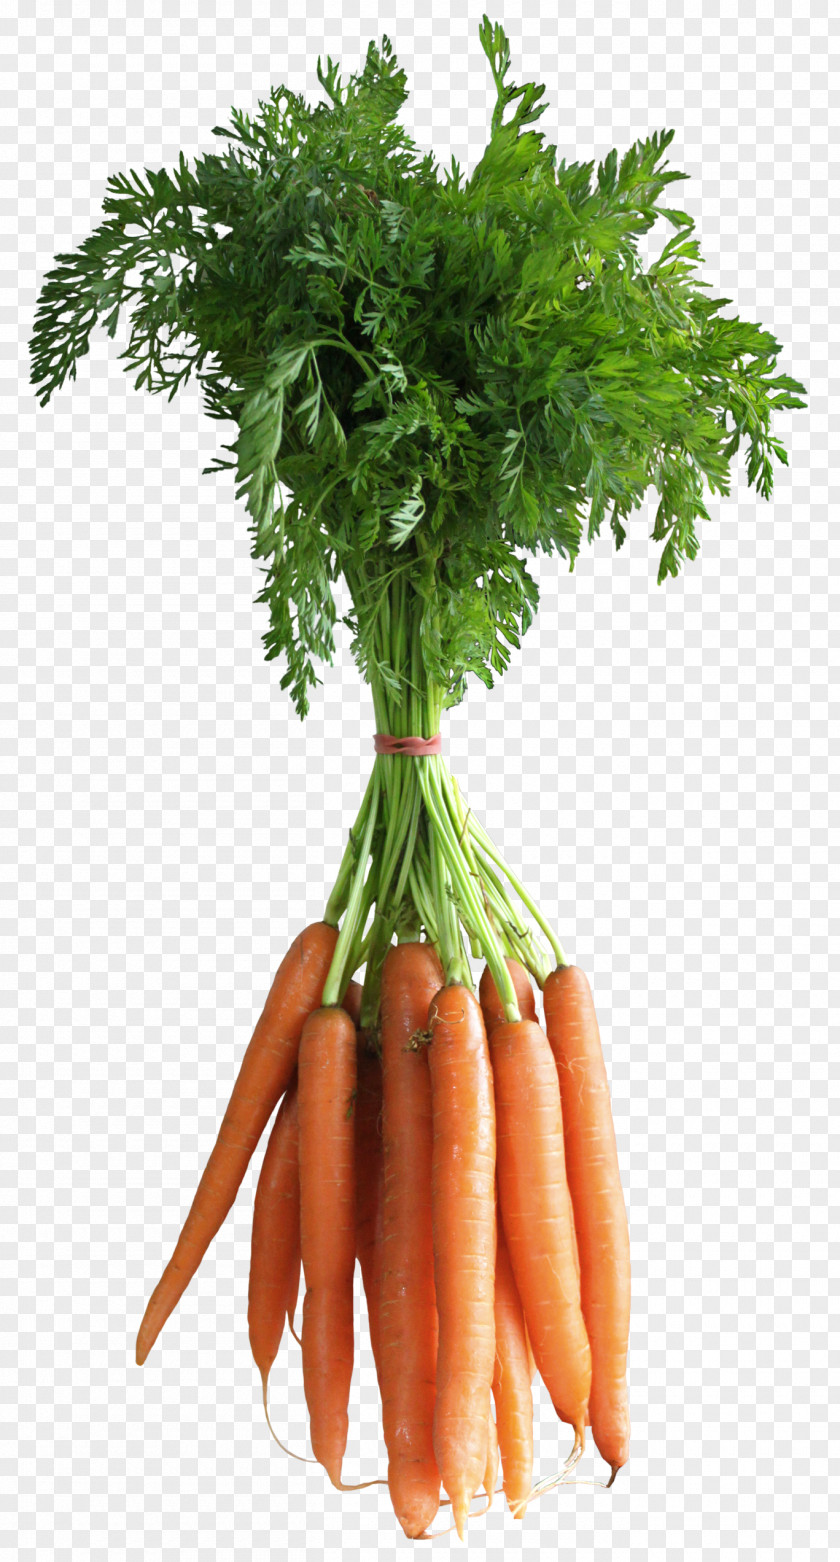 Carrots Clipart Picture Carrot Vegetable Computer File PNG